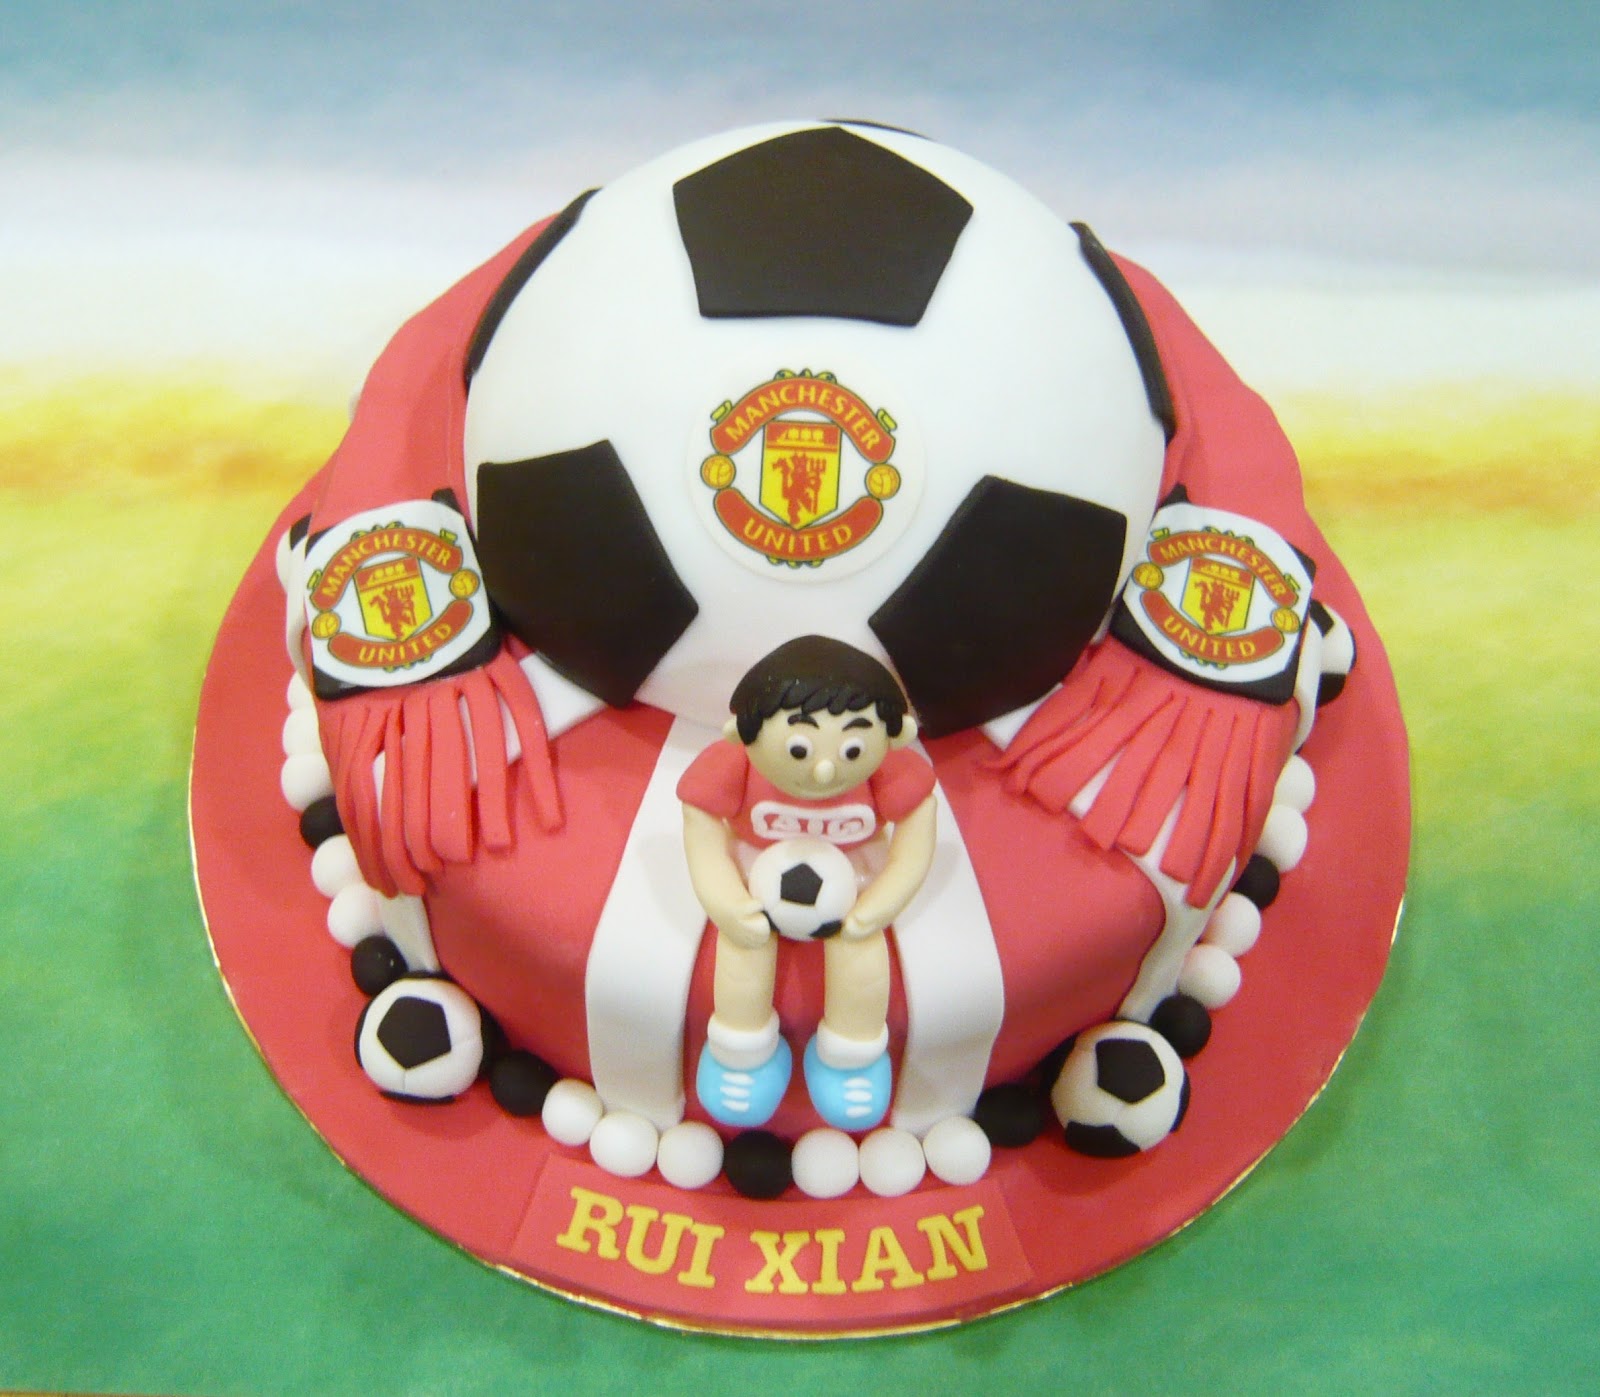 Jenn Cupcakes & Muffins Manchester United Themed Cake